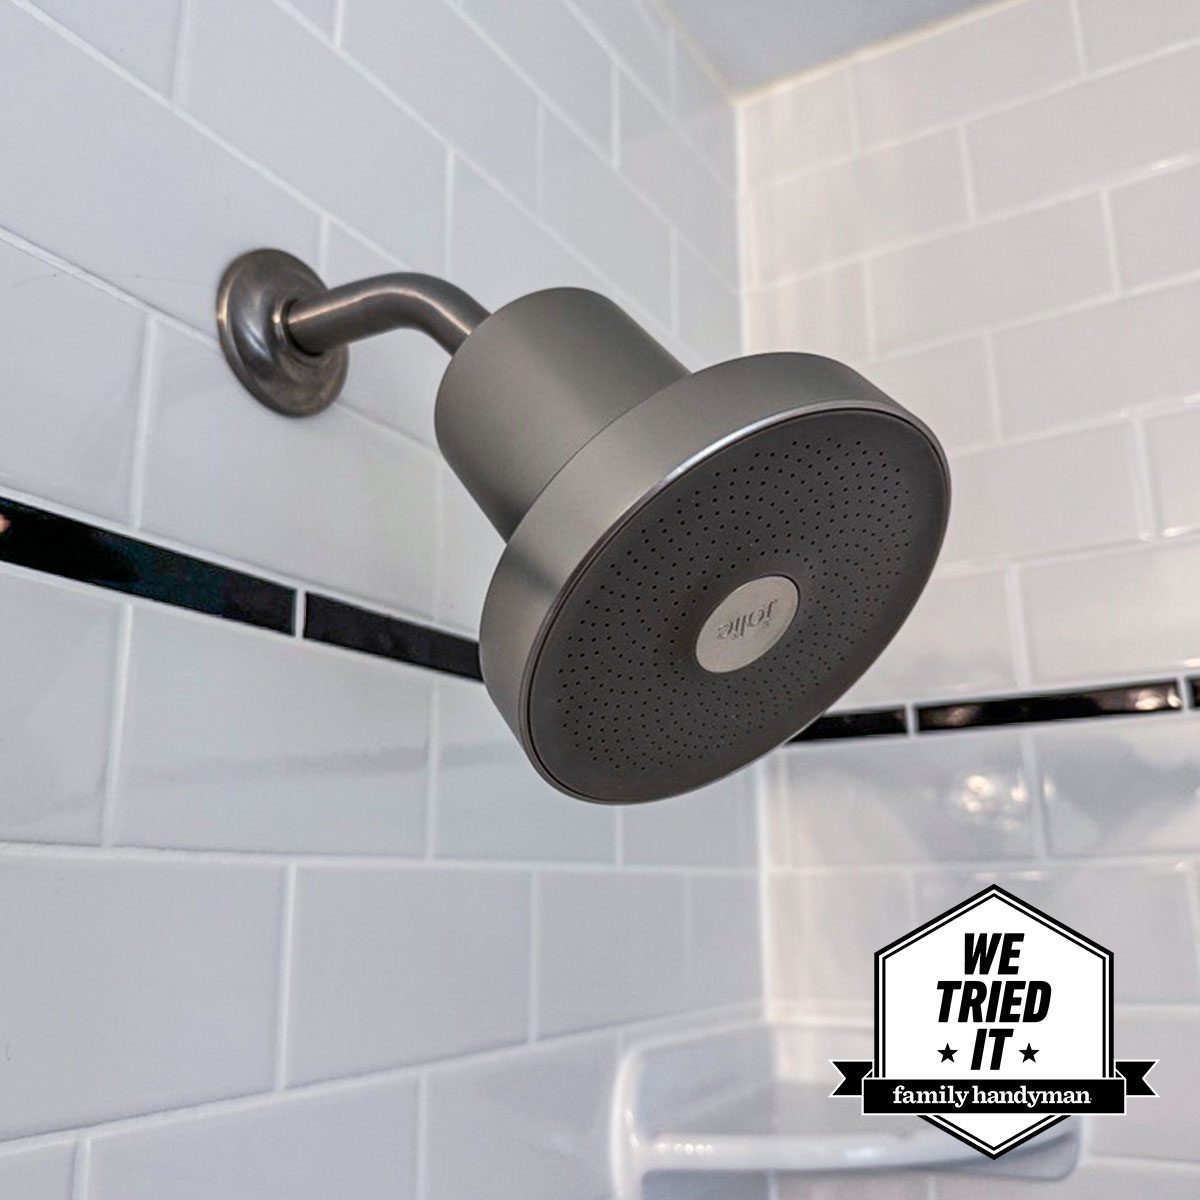 What is a Shower Filter and How Do They Work? – Fresh Water Systems